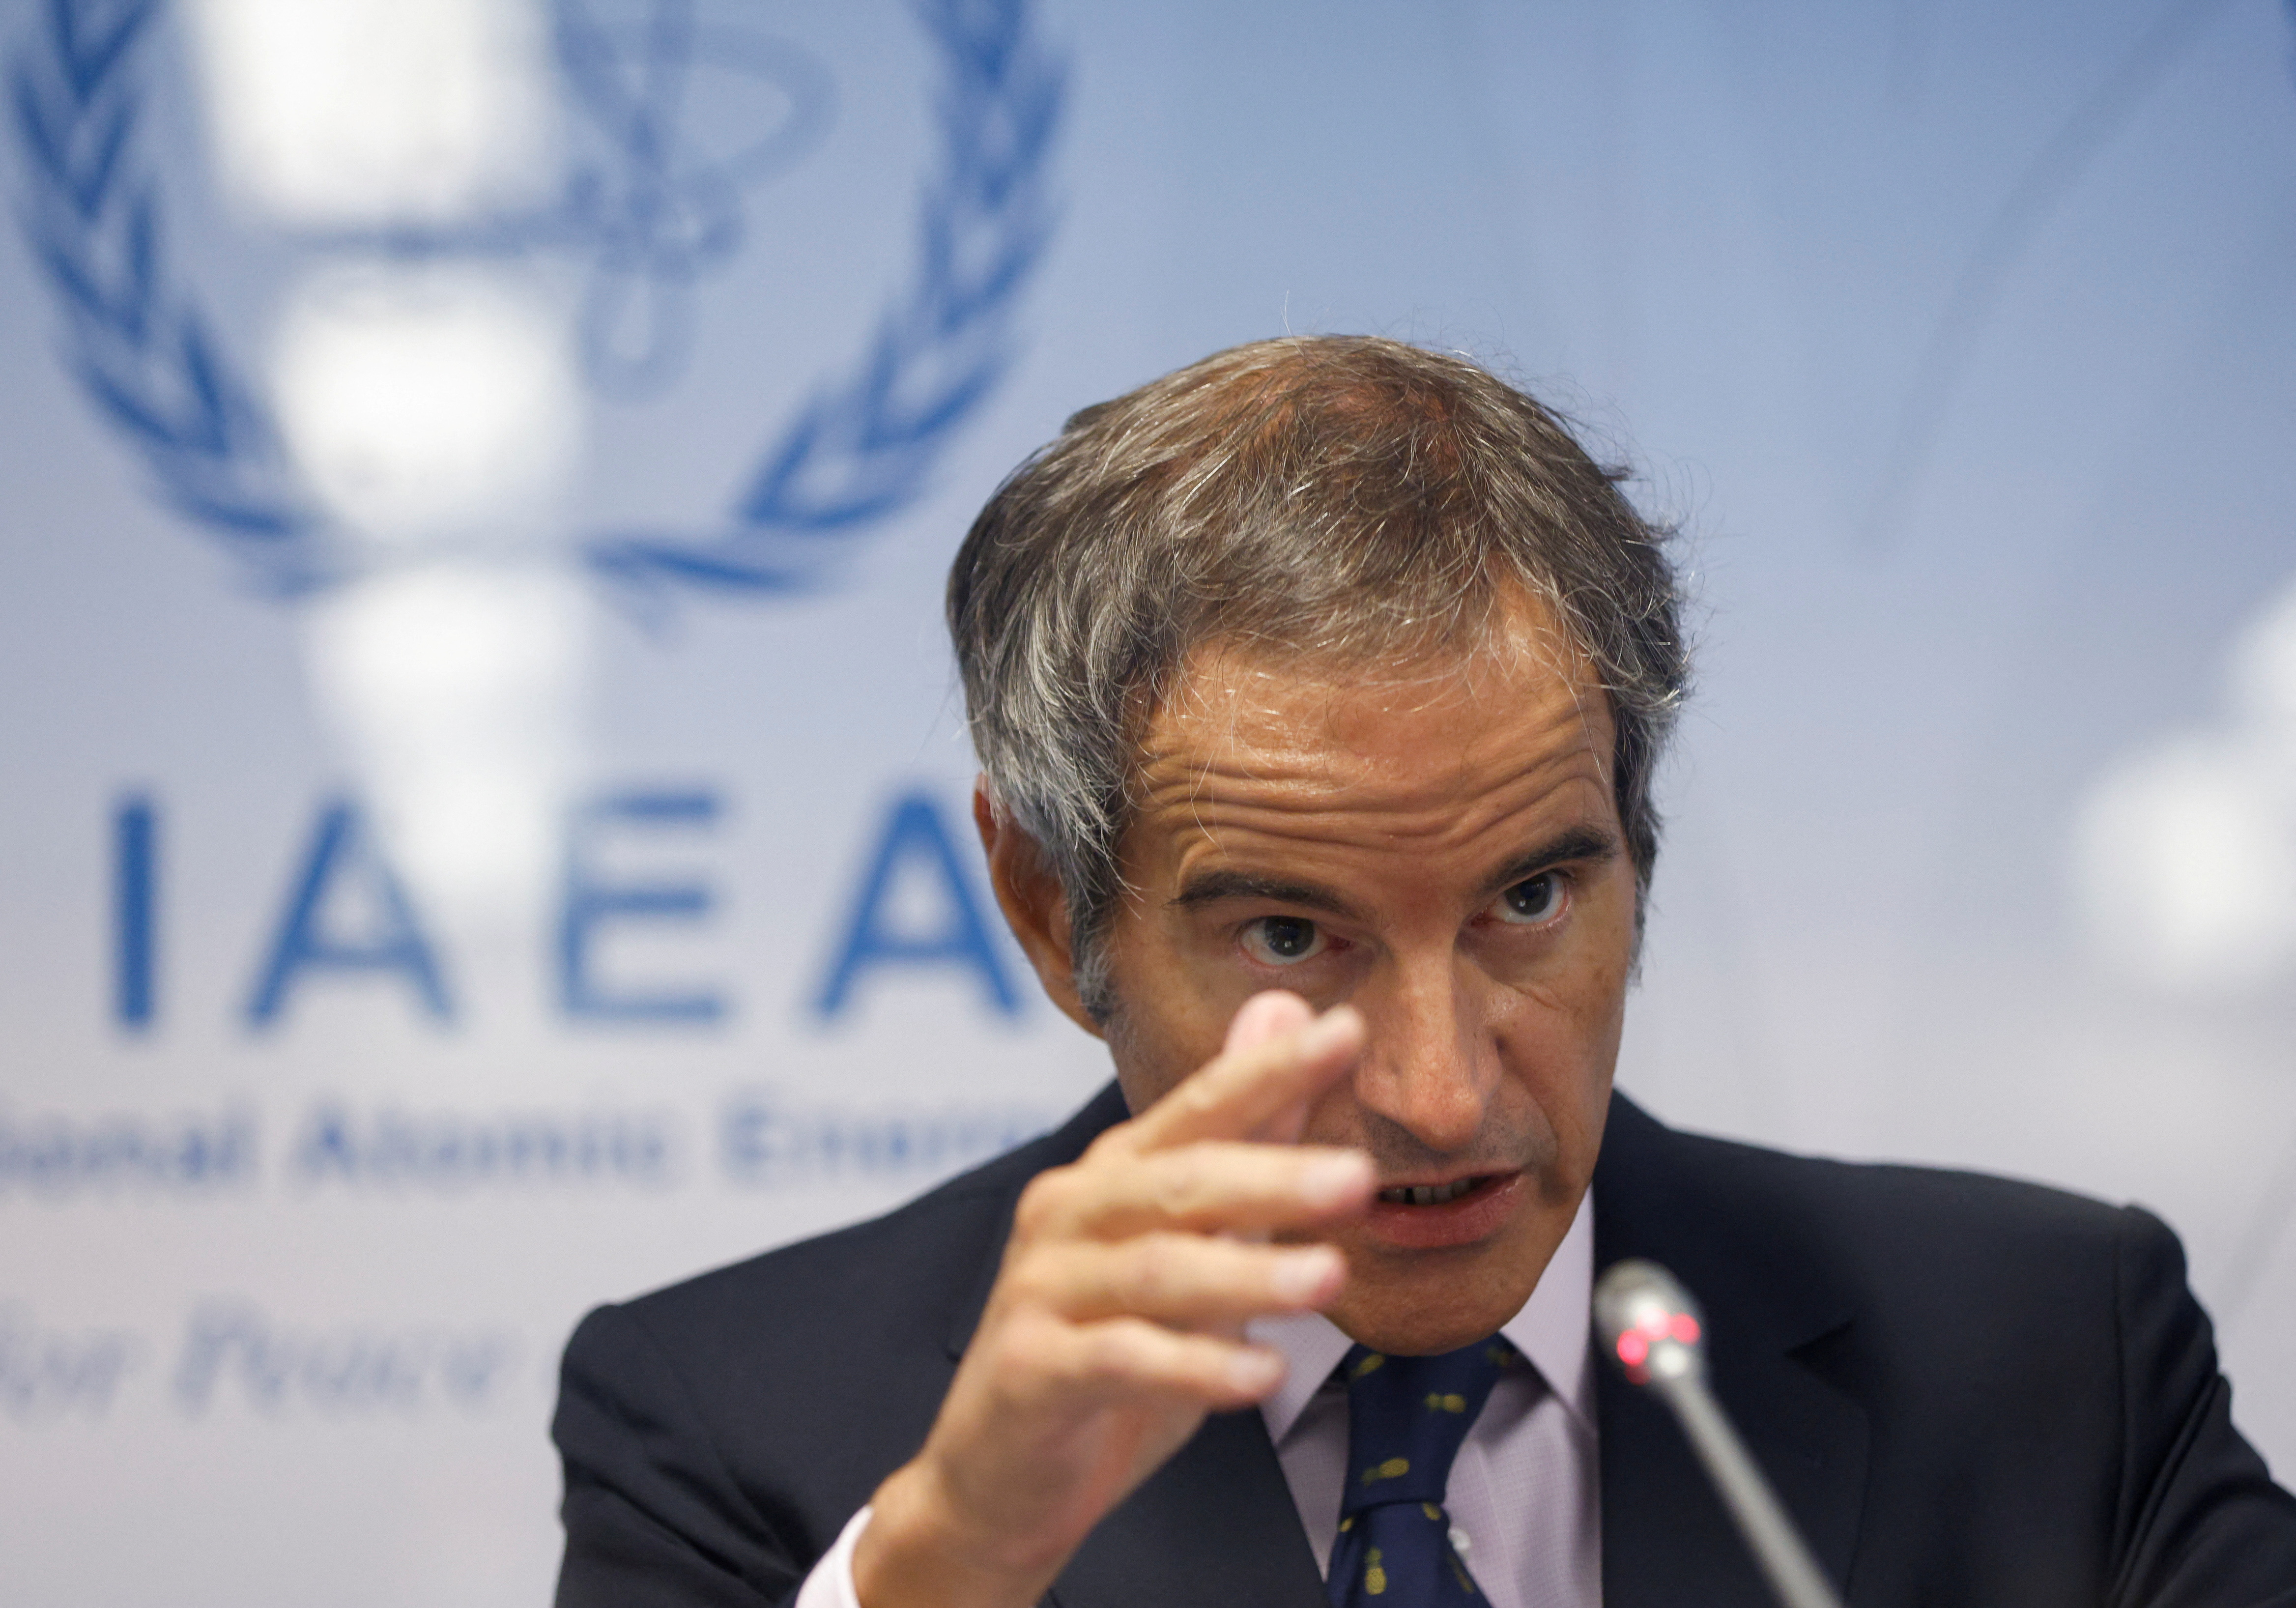 International Atomic Energy Agency Director General Rafael Grossi speaks during a news conference at an IAEA Board of Governors meeting in Vienna, Austria, September 13, 2021